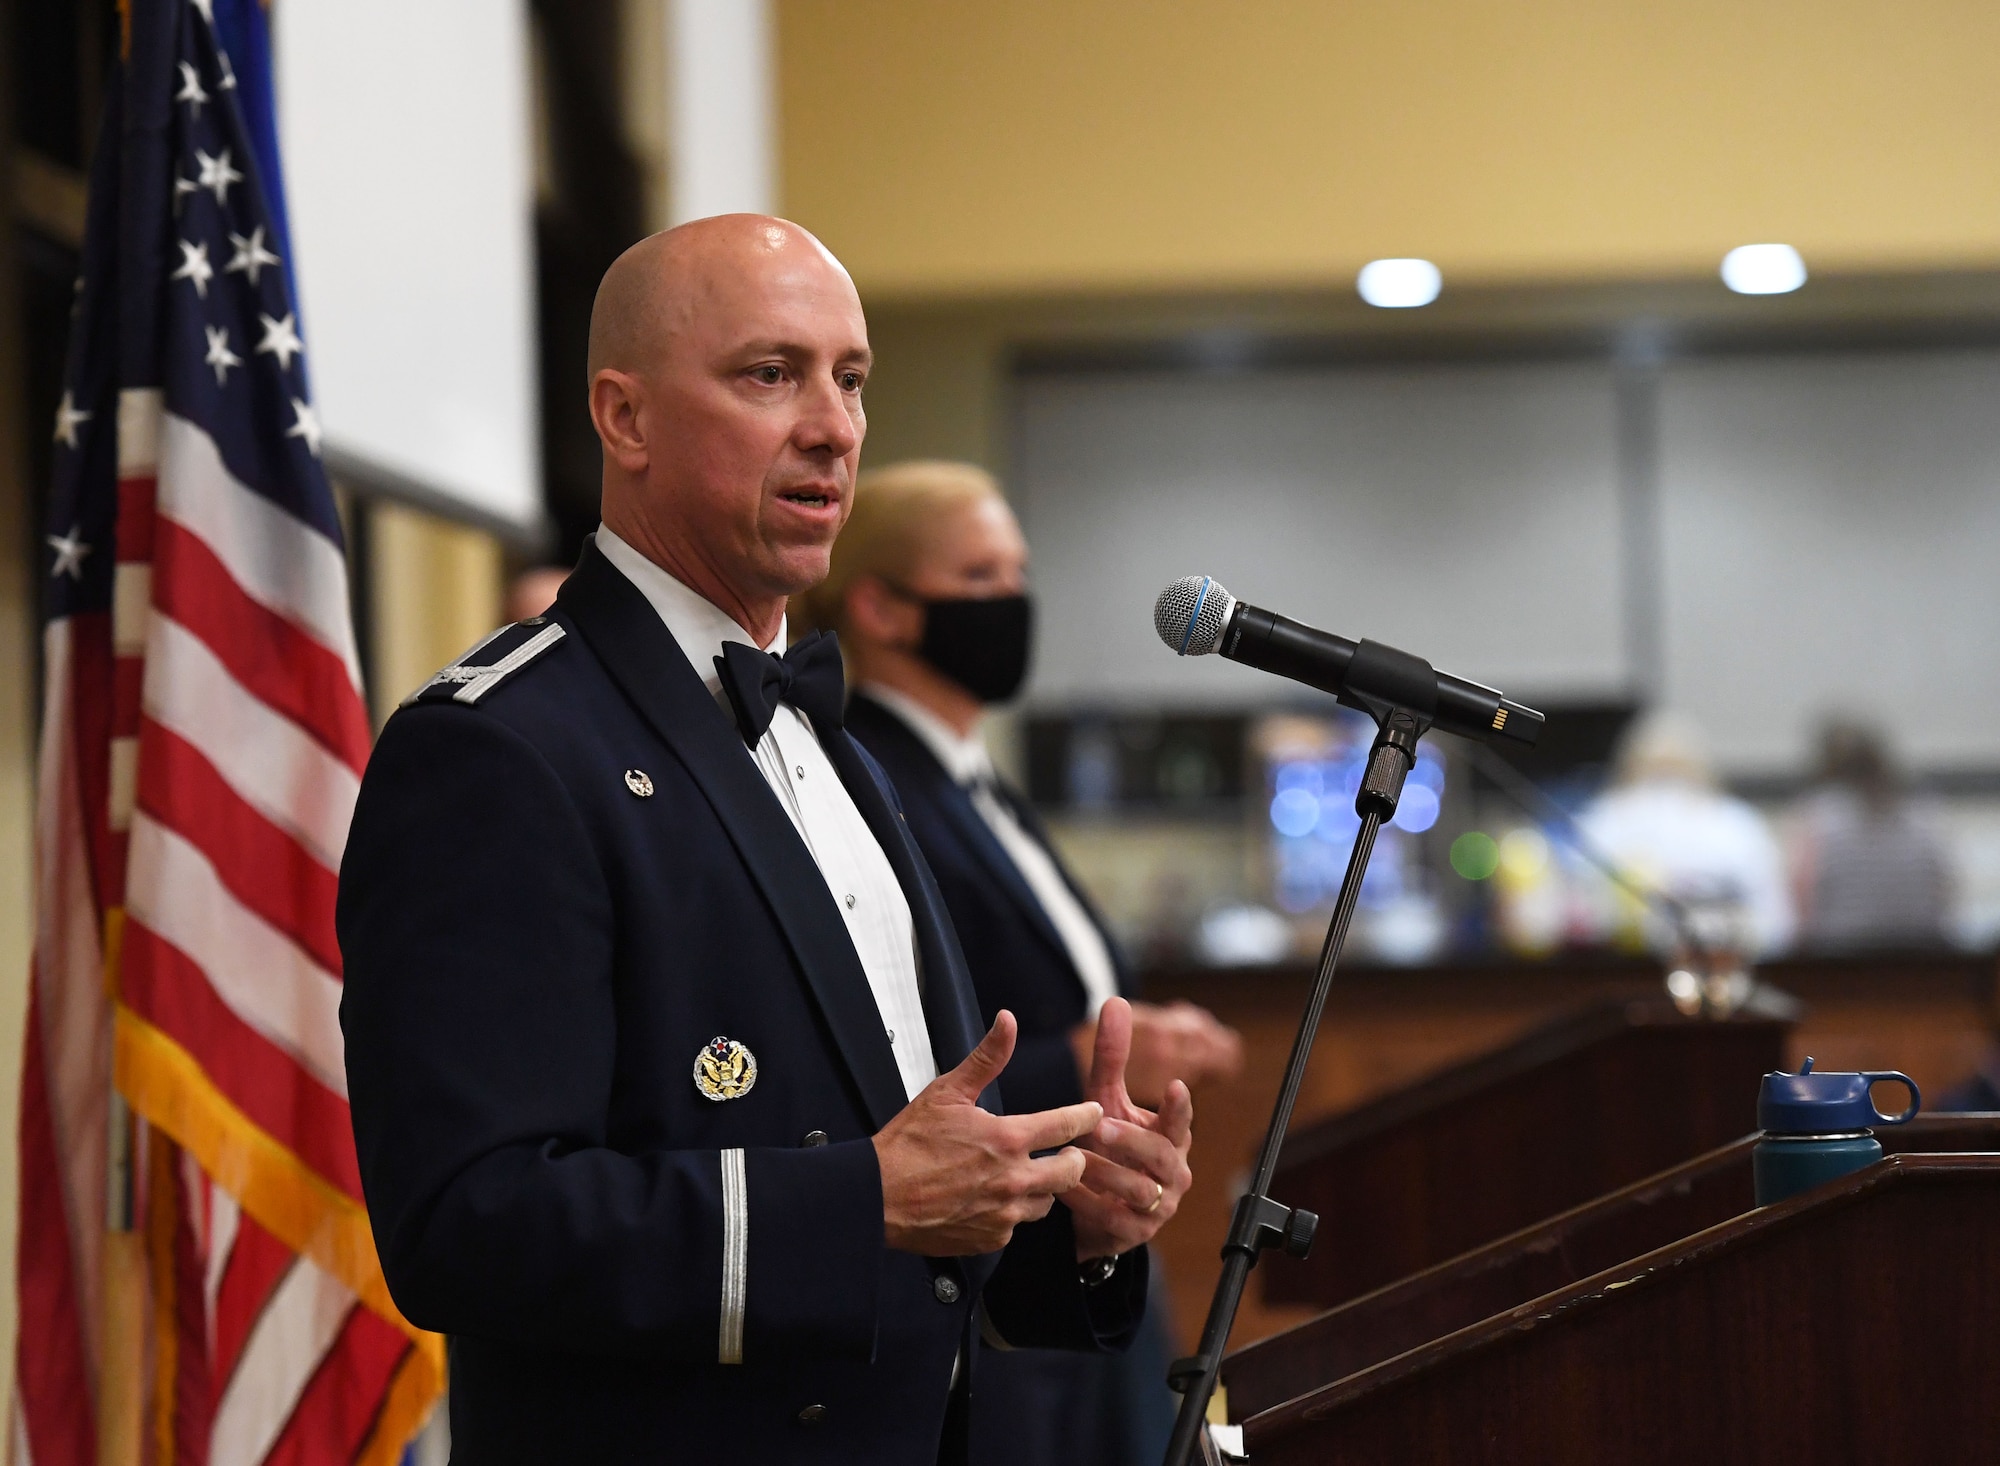 U.S. Air Force Col. William Hunter, 81st Training Wing commander, delivers remarks during the Senior NCO Induction Ceremony inside the Bay Breeze Event Center at Keesler Air Force Base, Mississippi, Sept. 10, 2021. More than thirty enlisted members were recognized during the event. (U.S. Air Force photo by Kemberly Groue)